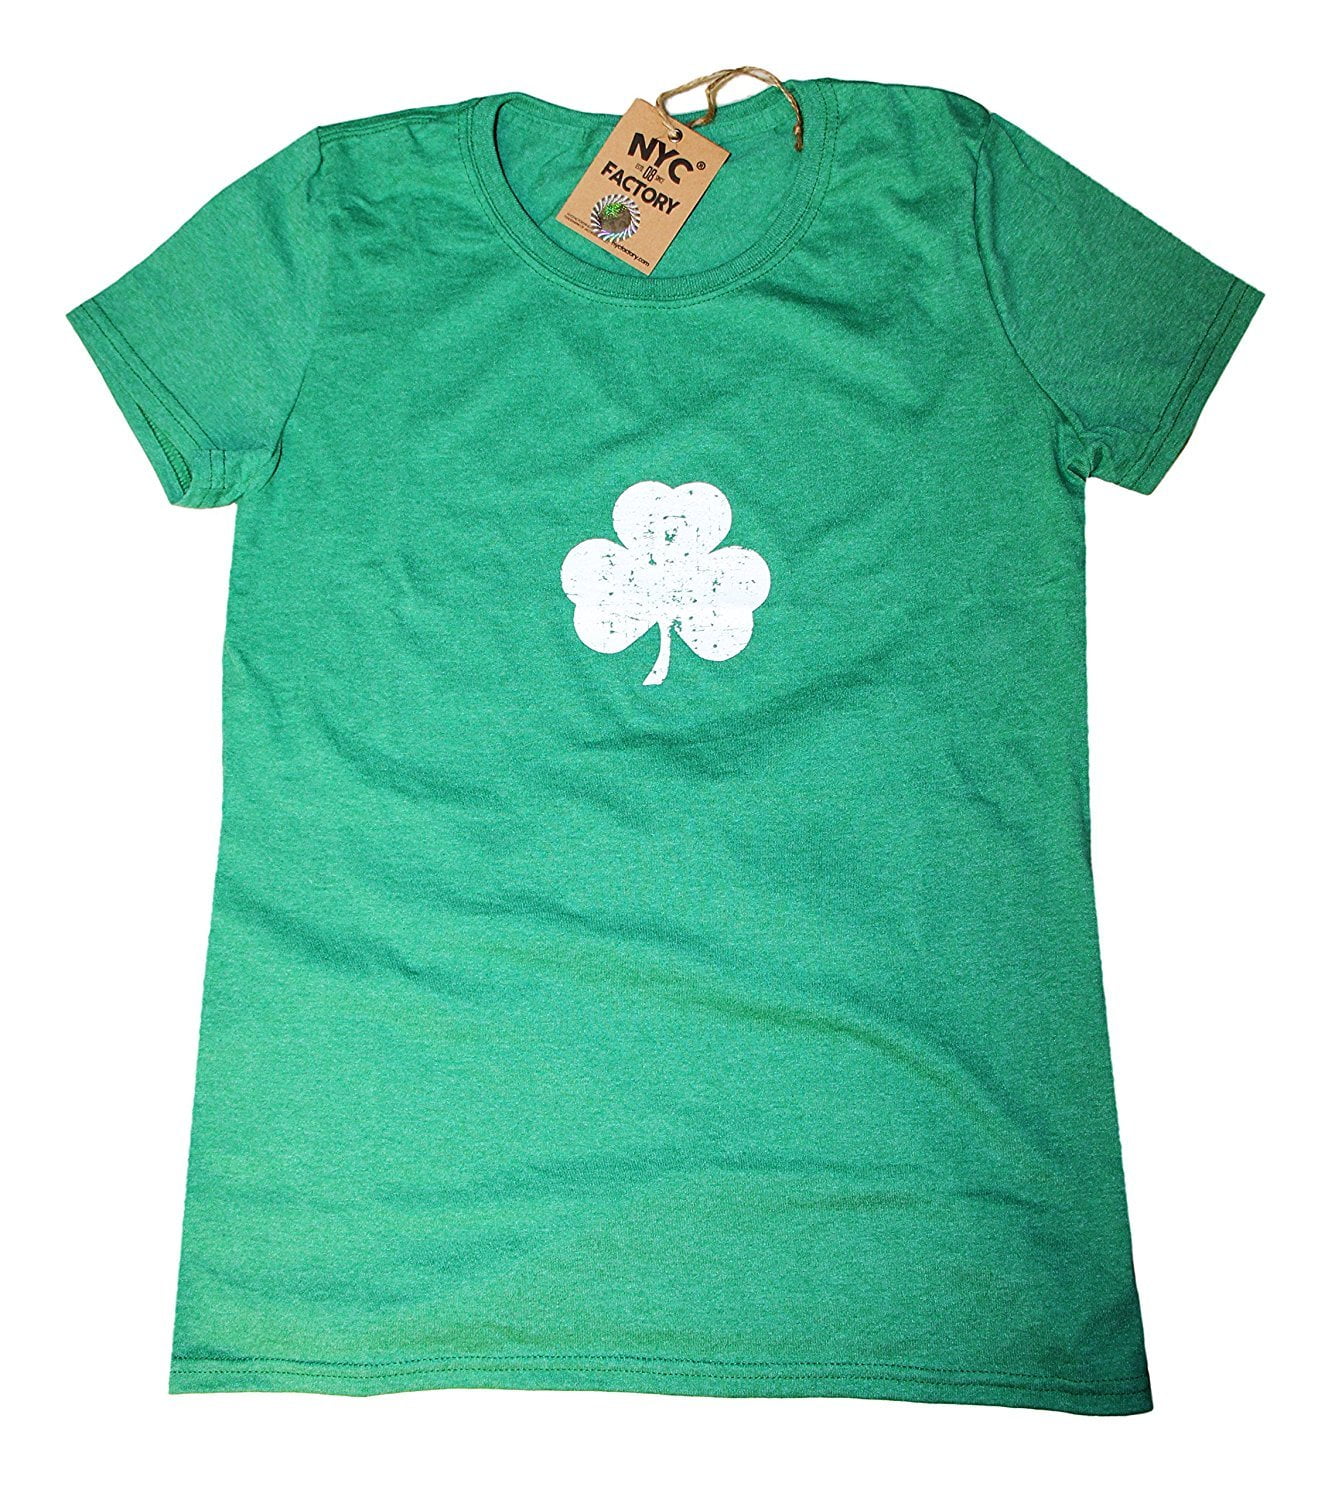 Queen of Shenanigans Trouble Maker St Drinking Shirt Patrick's Day Irish Green Shirt Patty's Day Shirt Women's St Four Leaf Clover